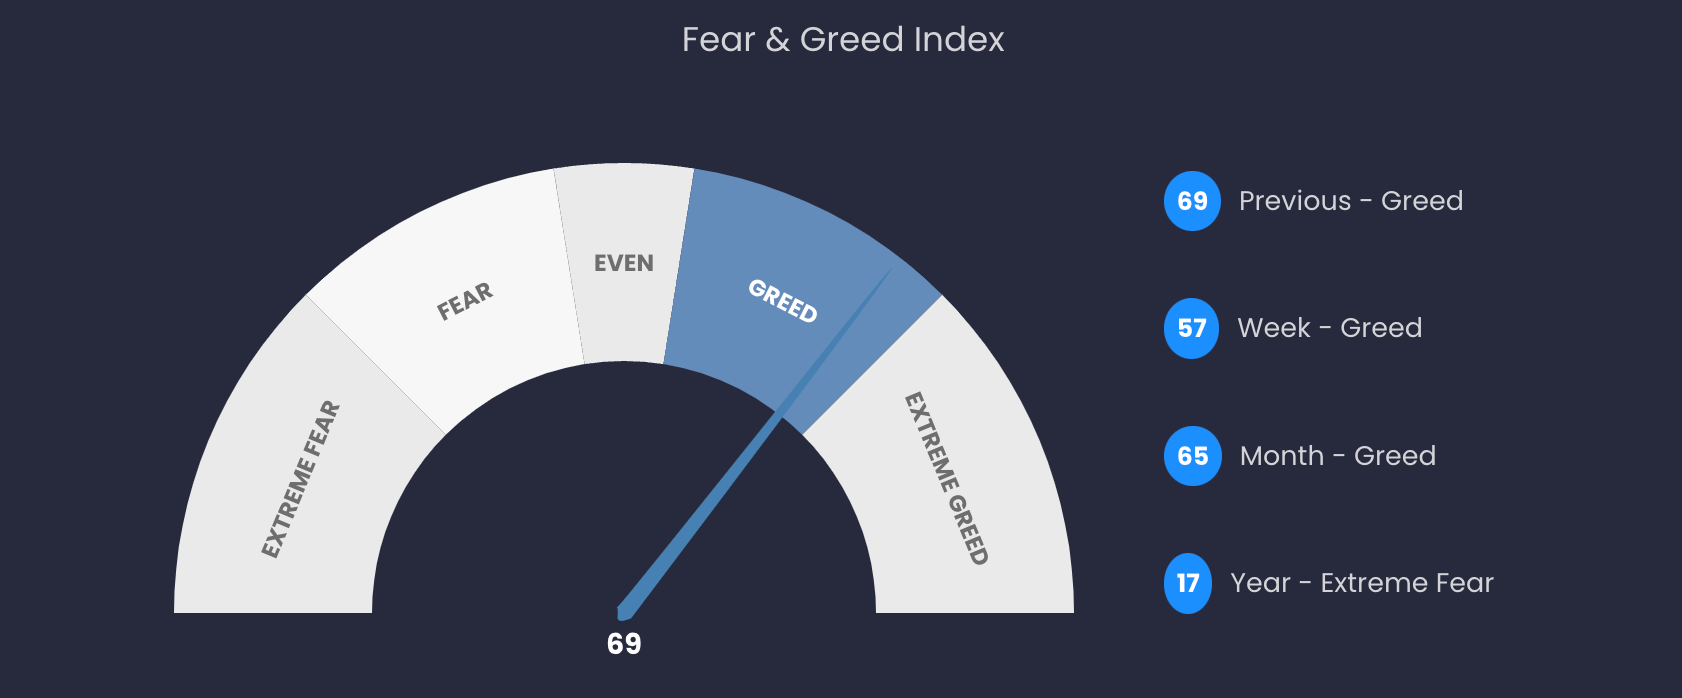 Fear And Greed Index: How to Understand Investor Sentiment and Use It